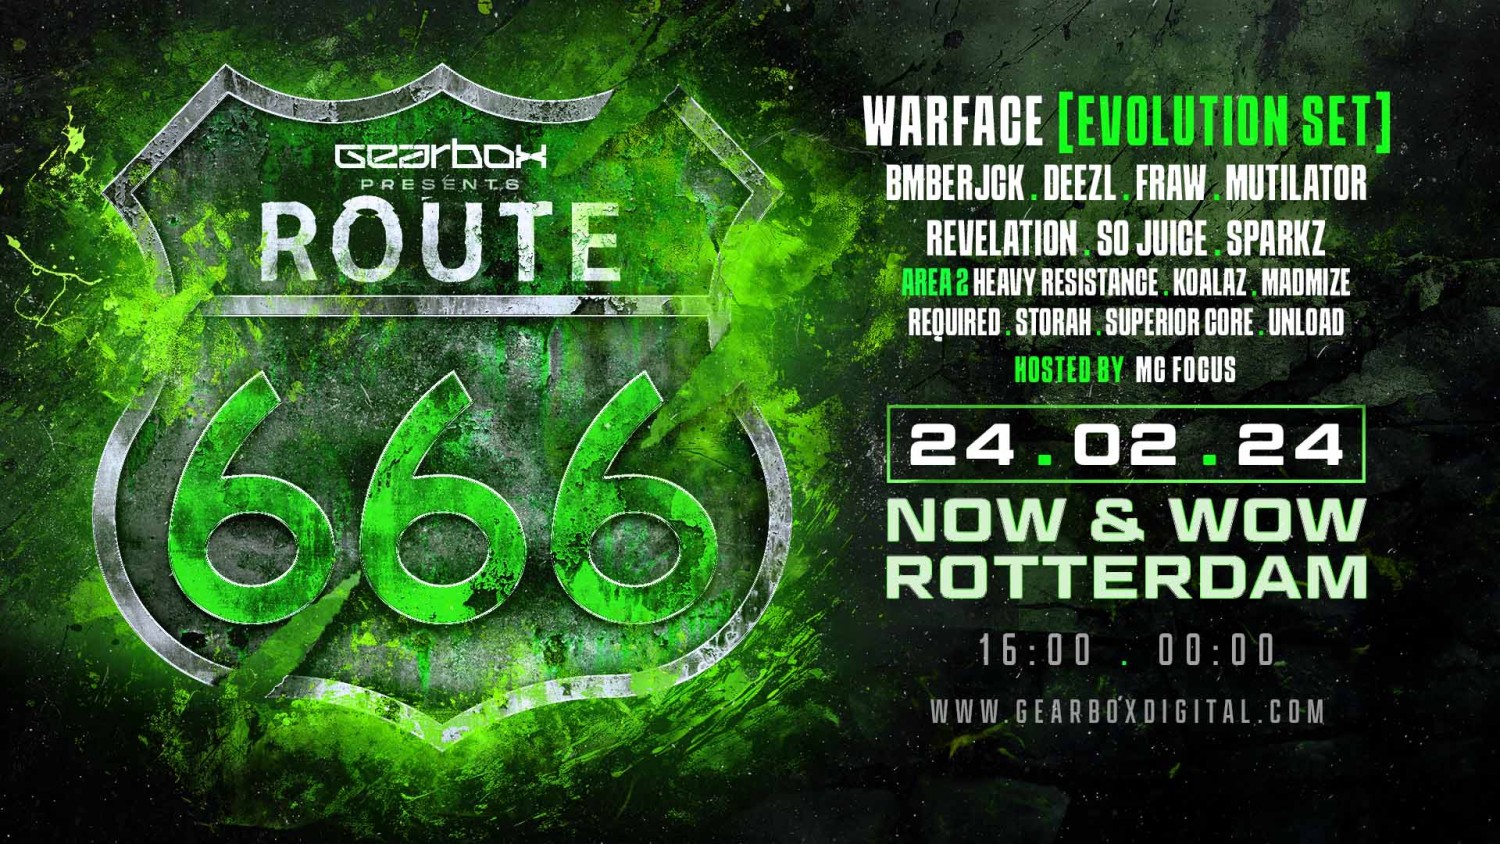 Gearbox presents Route 666